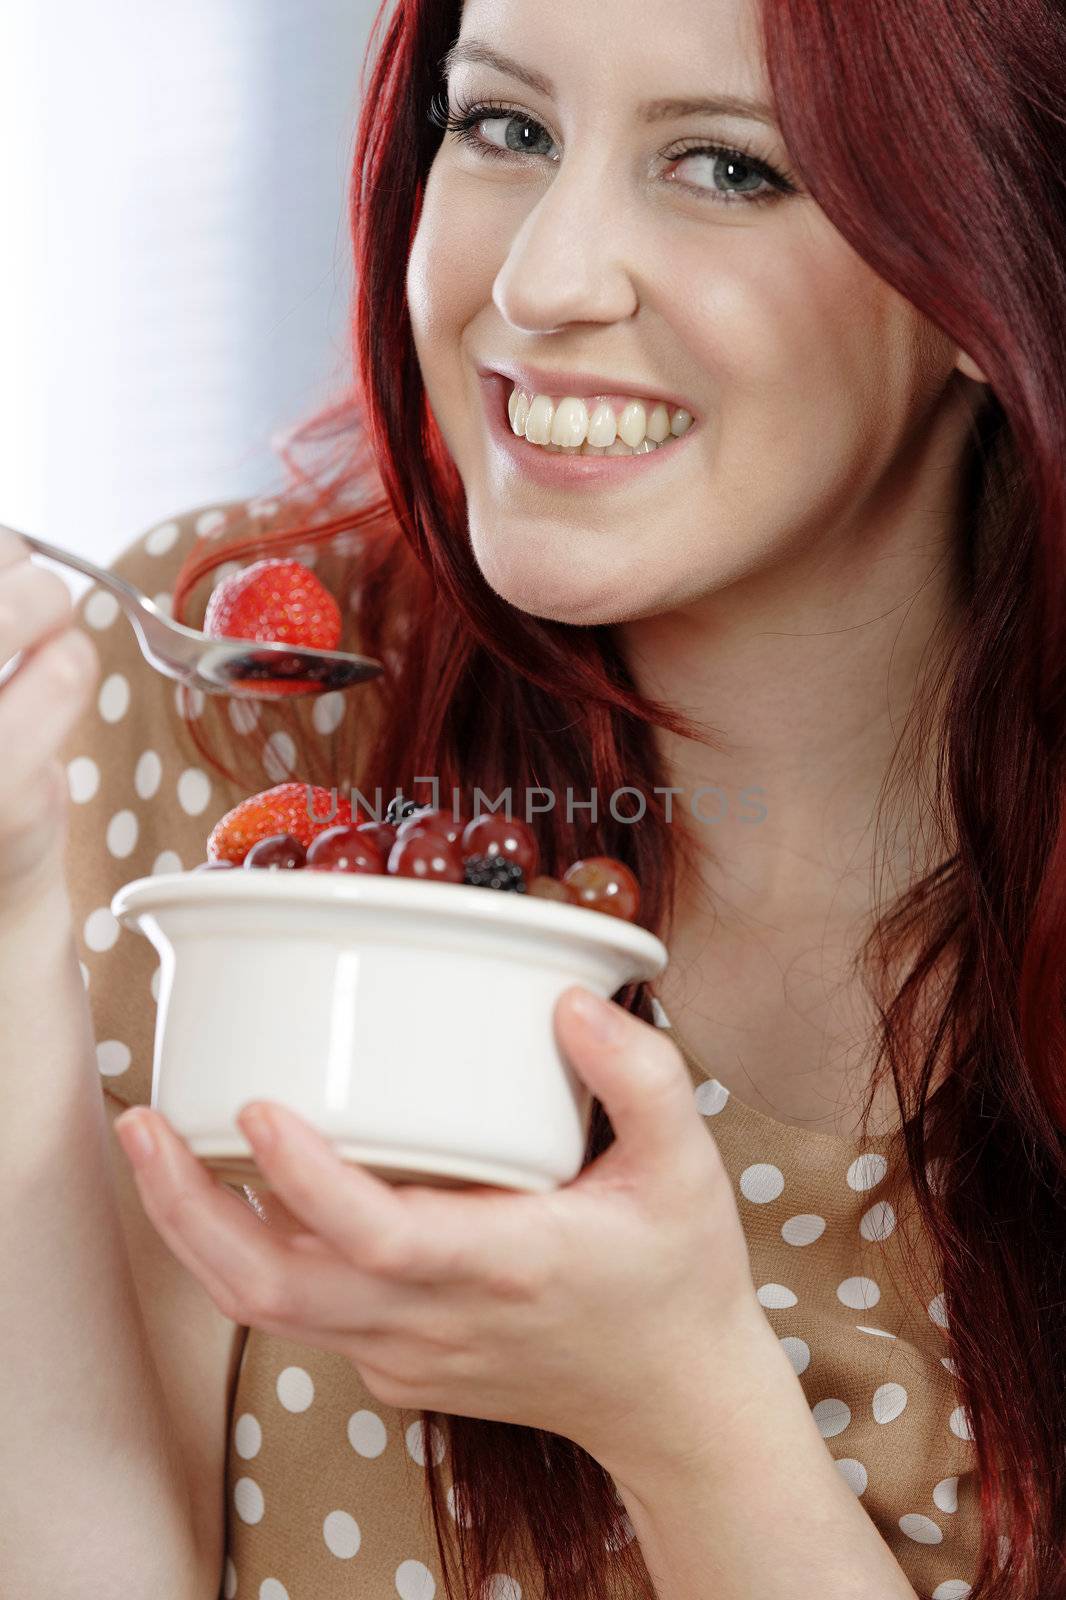 Happy smiling young woman enjoying a fresh bowl of fruit for breakfast.